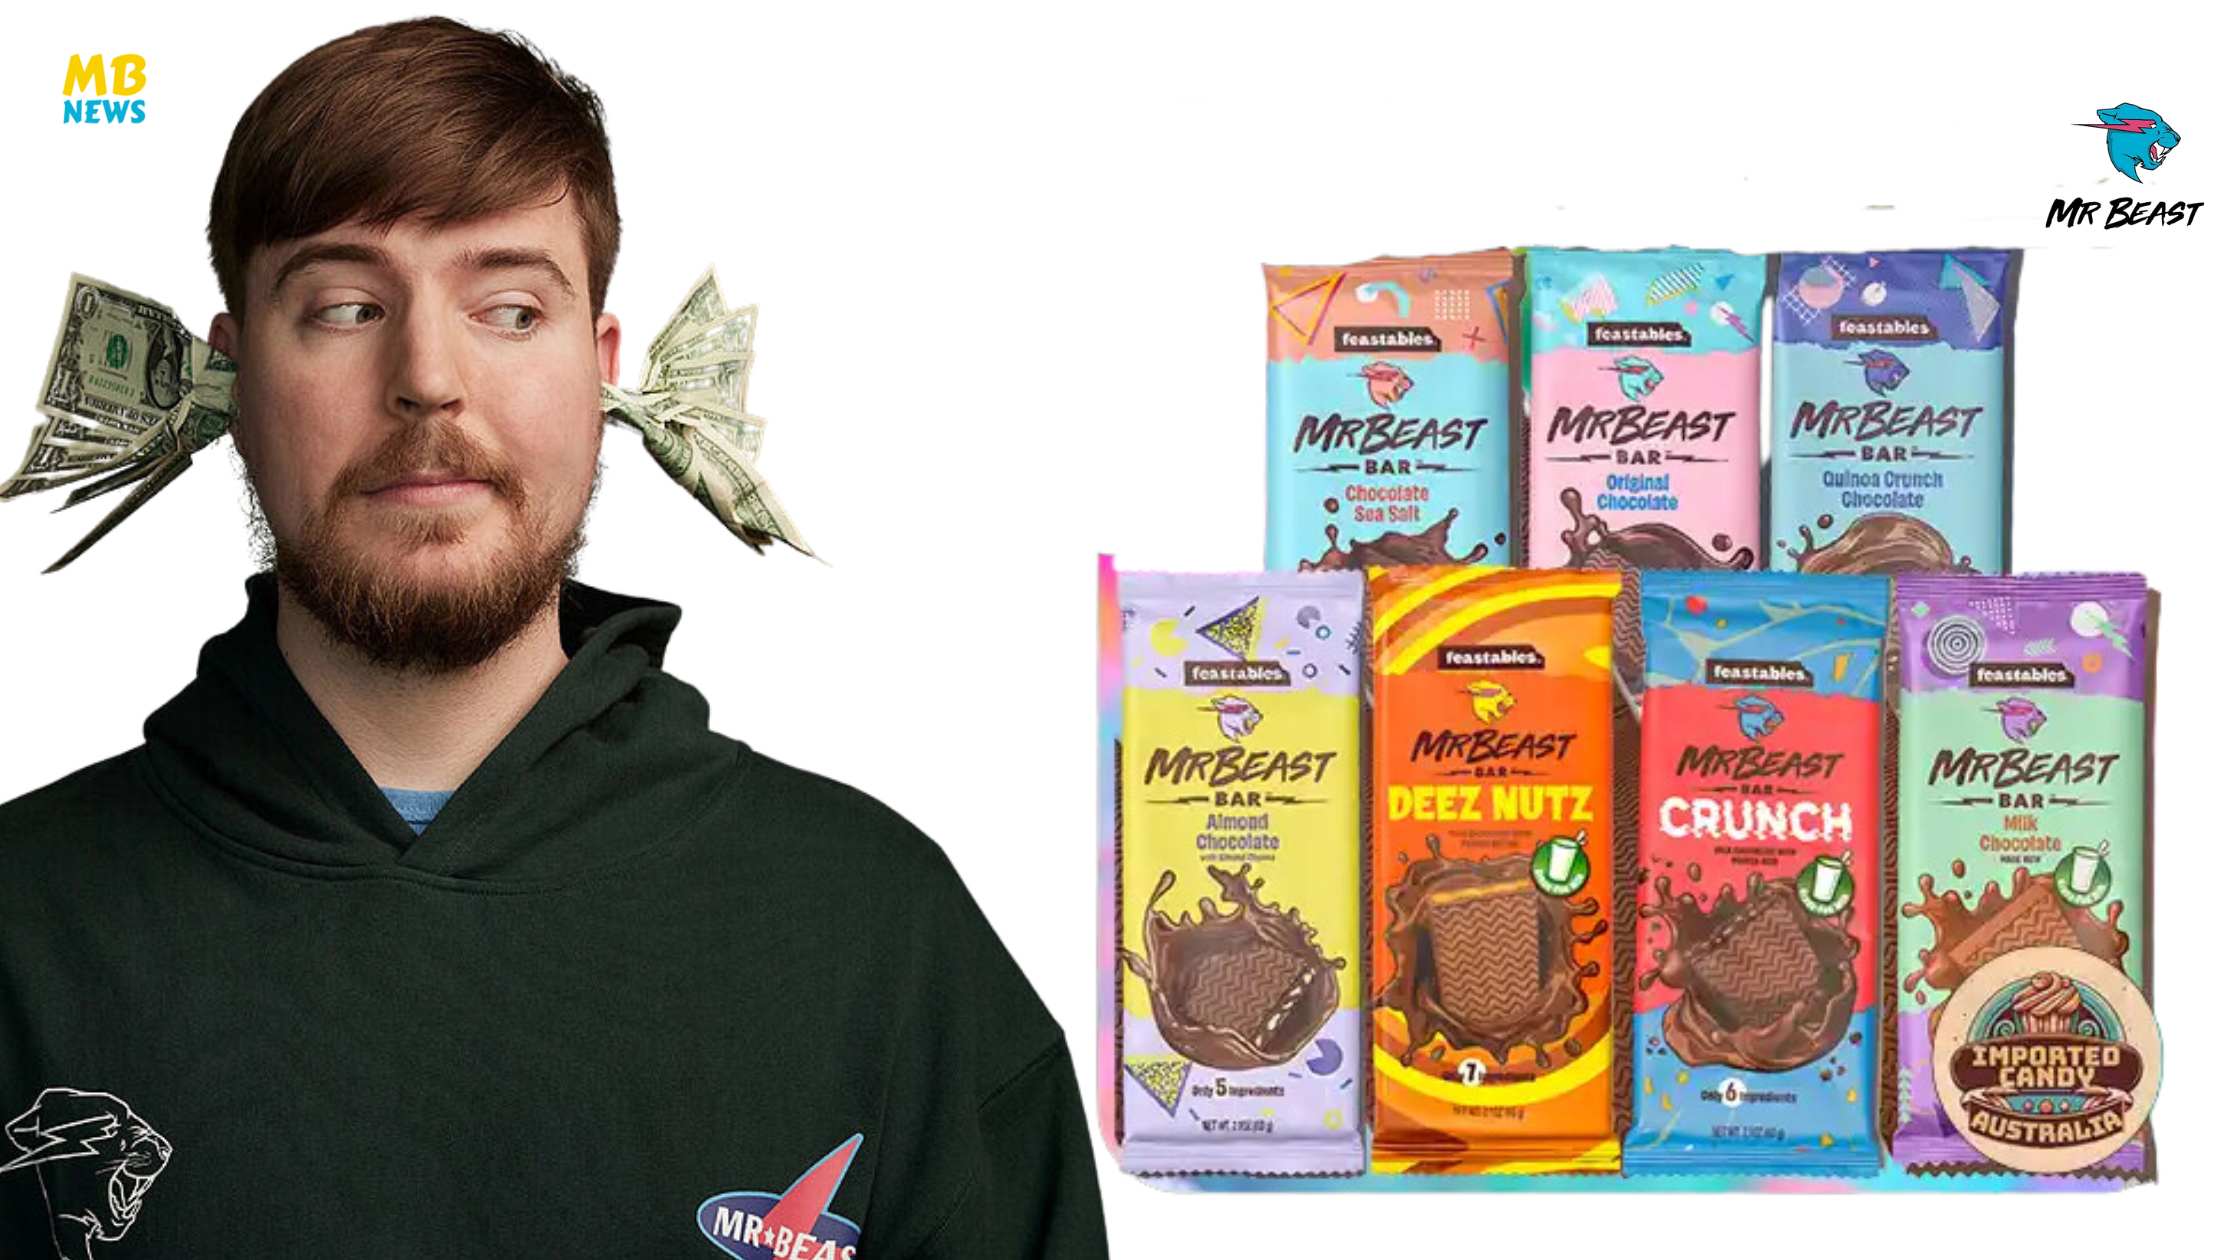 How Much Money Does Mrbeast Make From Feastables!